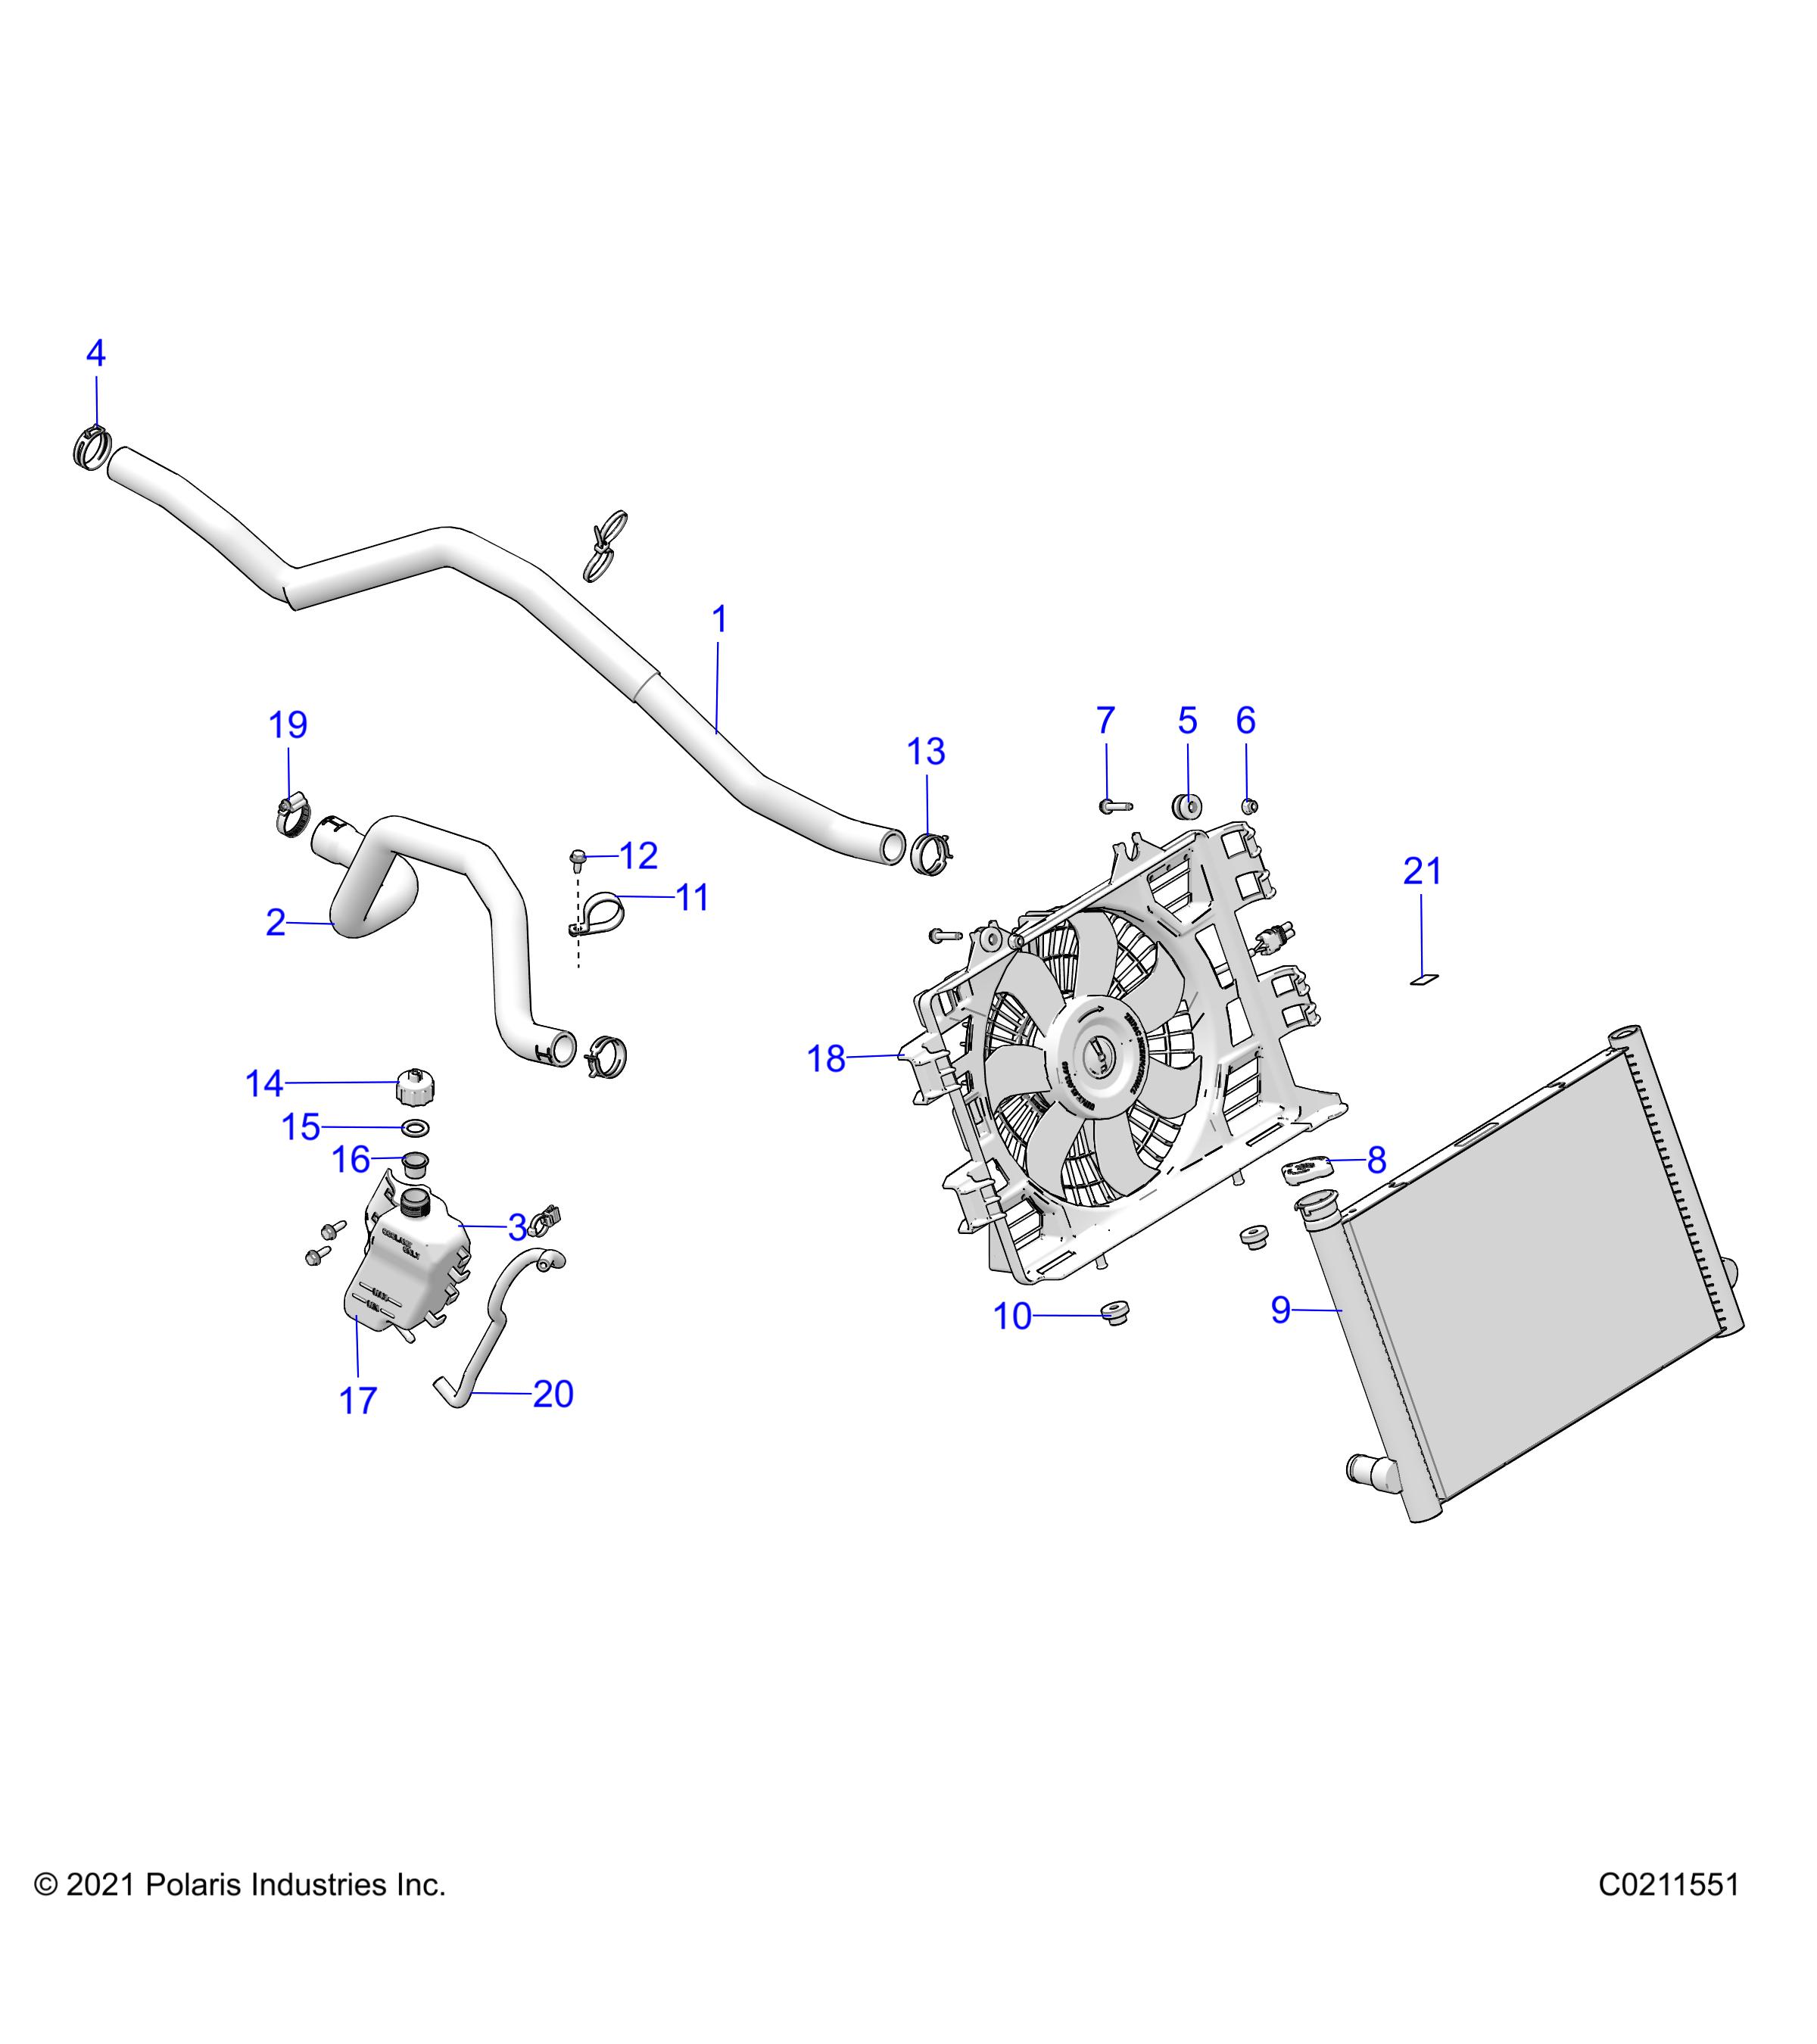 Part Number : 5413509 GROMMET AND INSERT ASSEMBLY